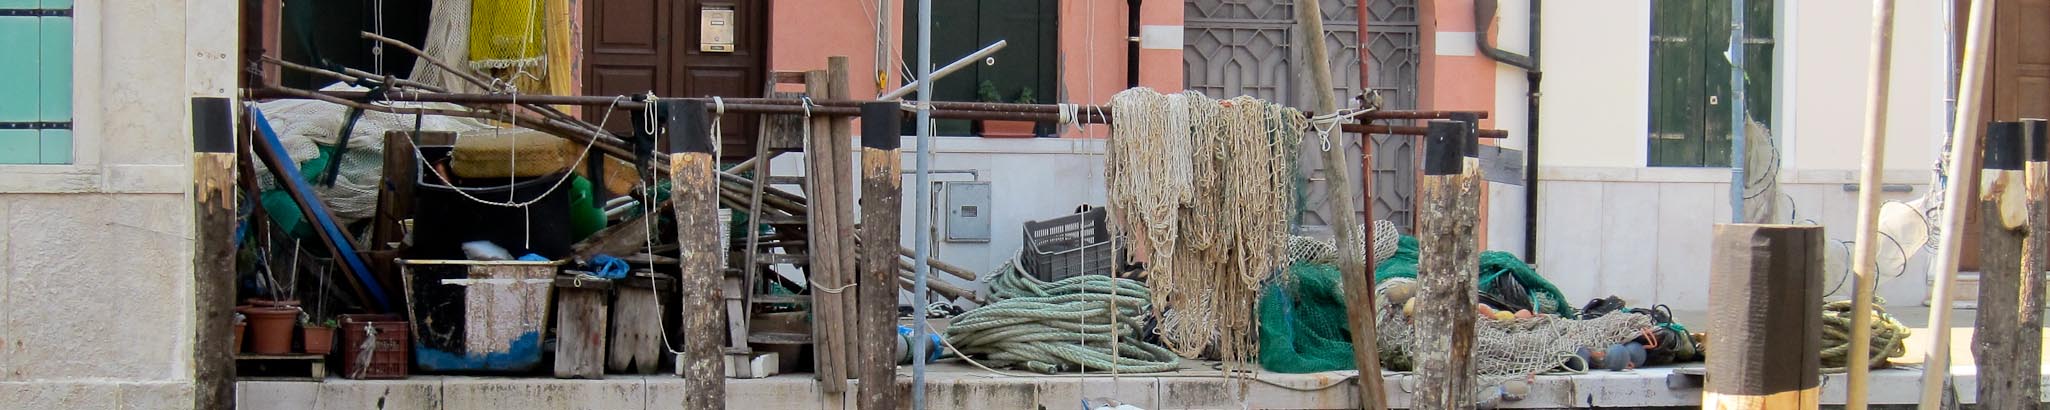 Fishing tackle in Chioggia pantry of Venice